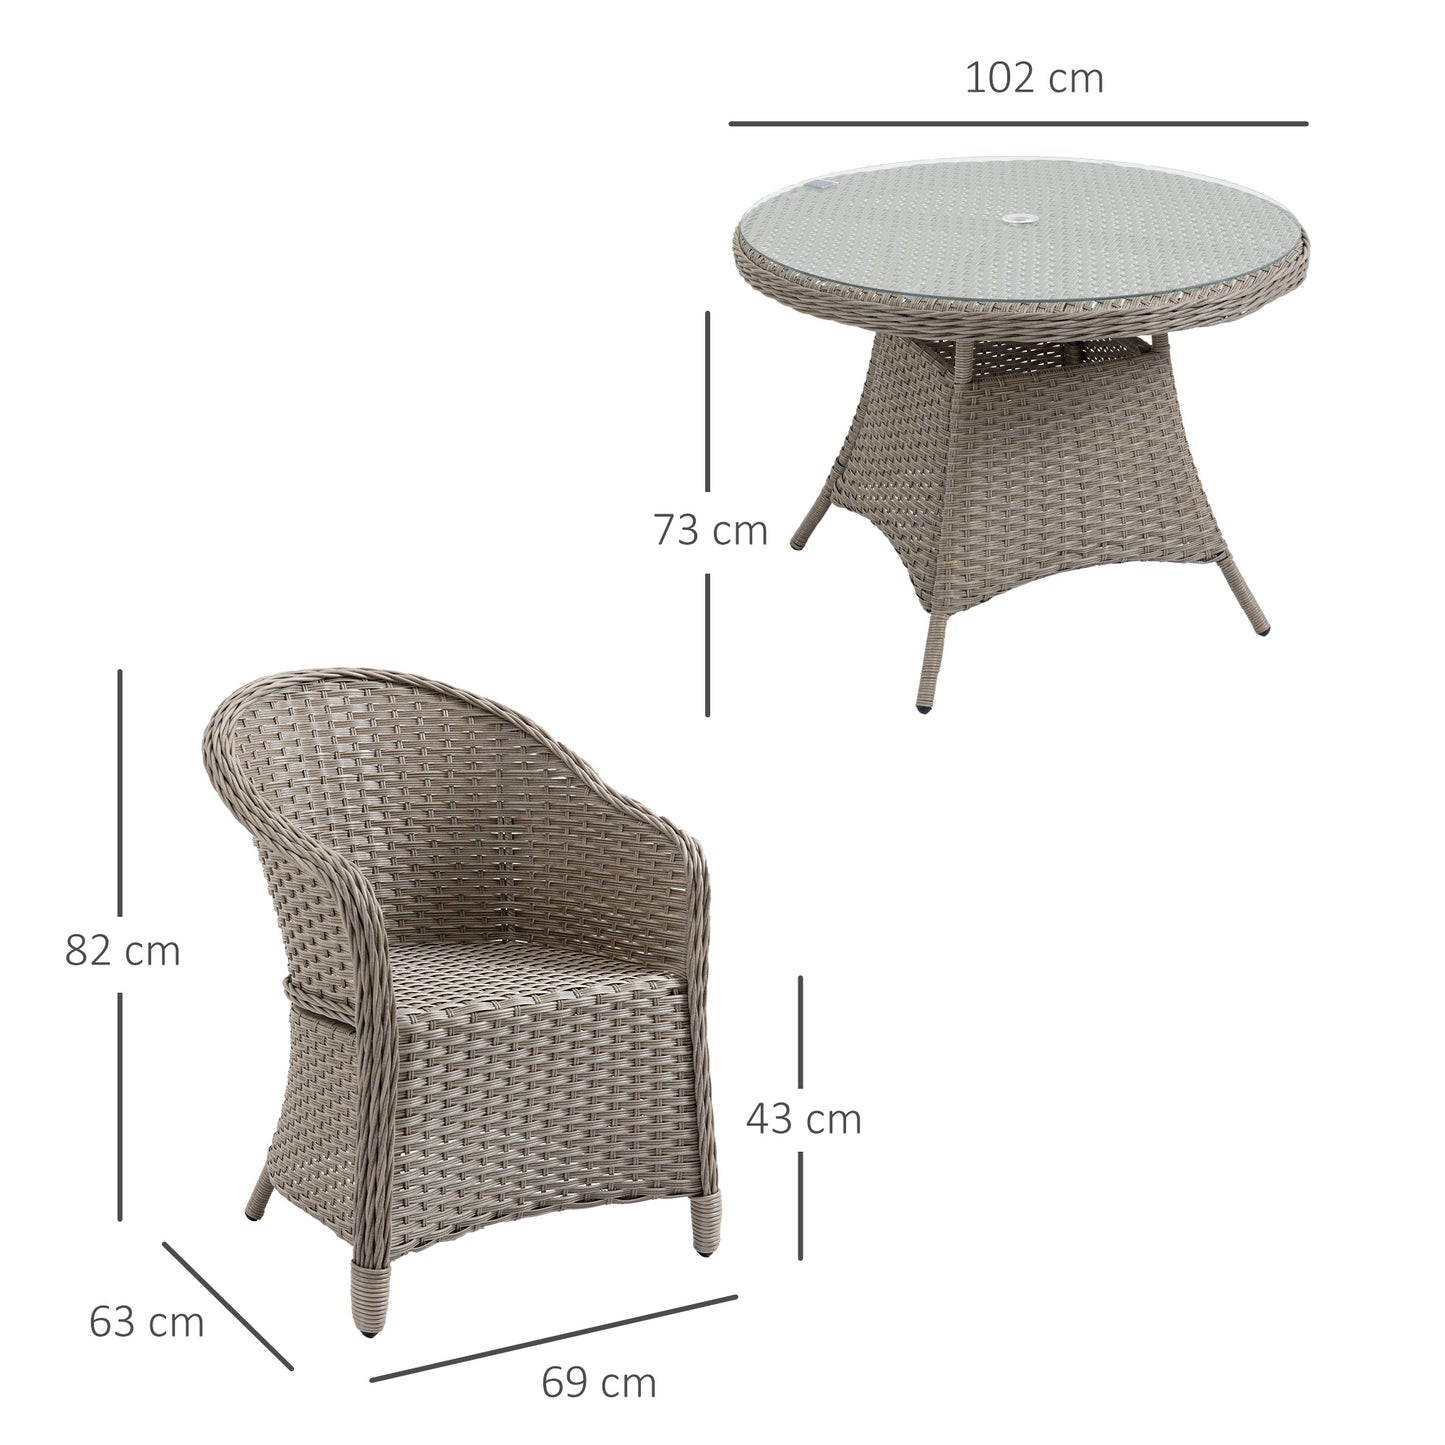 Outsunny 5 Pieces Outdoor Patio PE Rattan Dining Set, Four Seater Garden Furniture - 4 Chairs & Round Table w/ Umbrella Hole, Mixed Grey